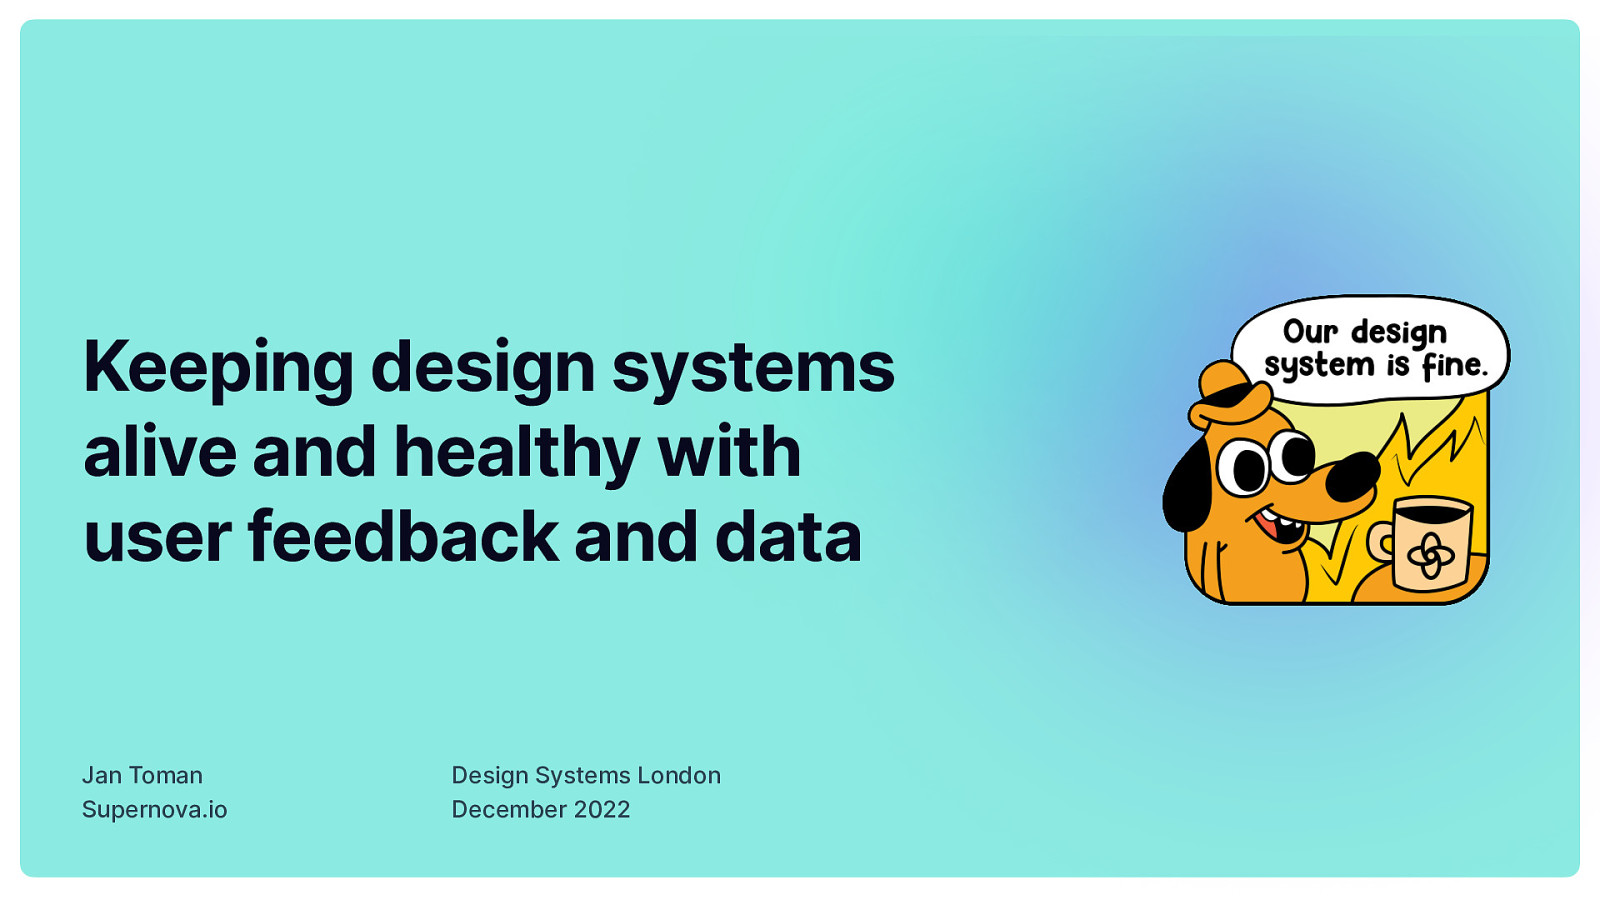 Keeping design systems alive and healthy with user feedback and data